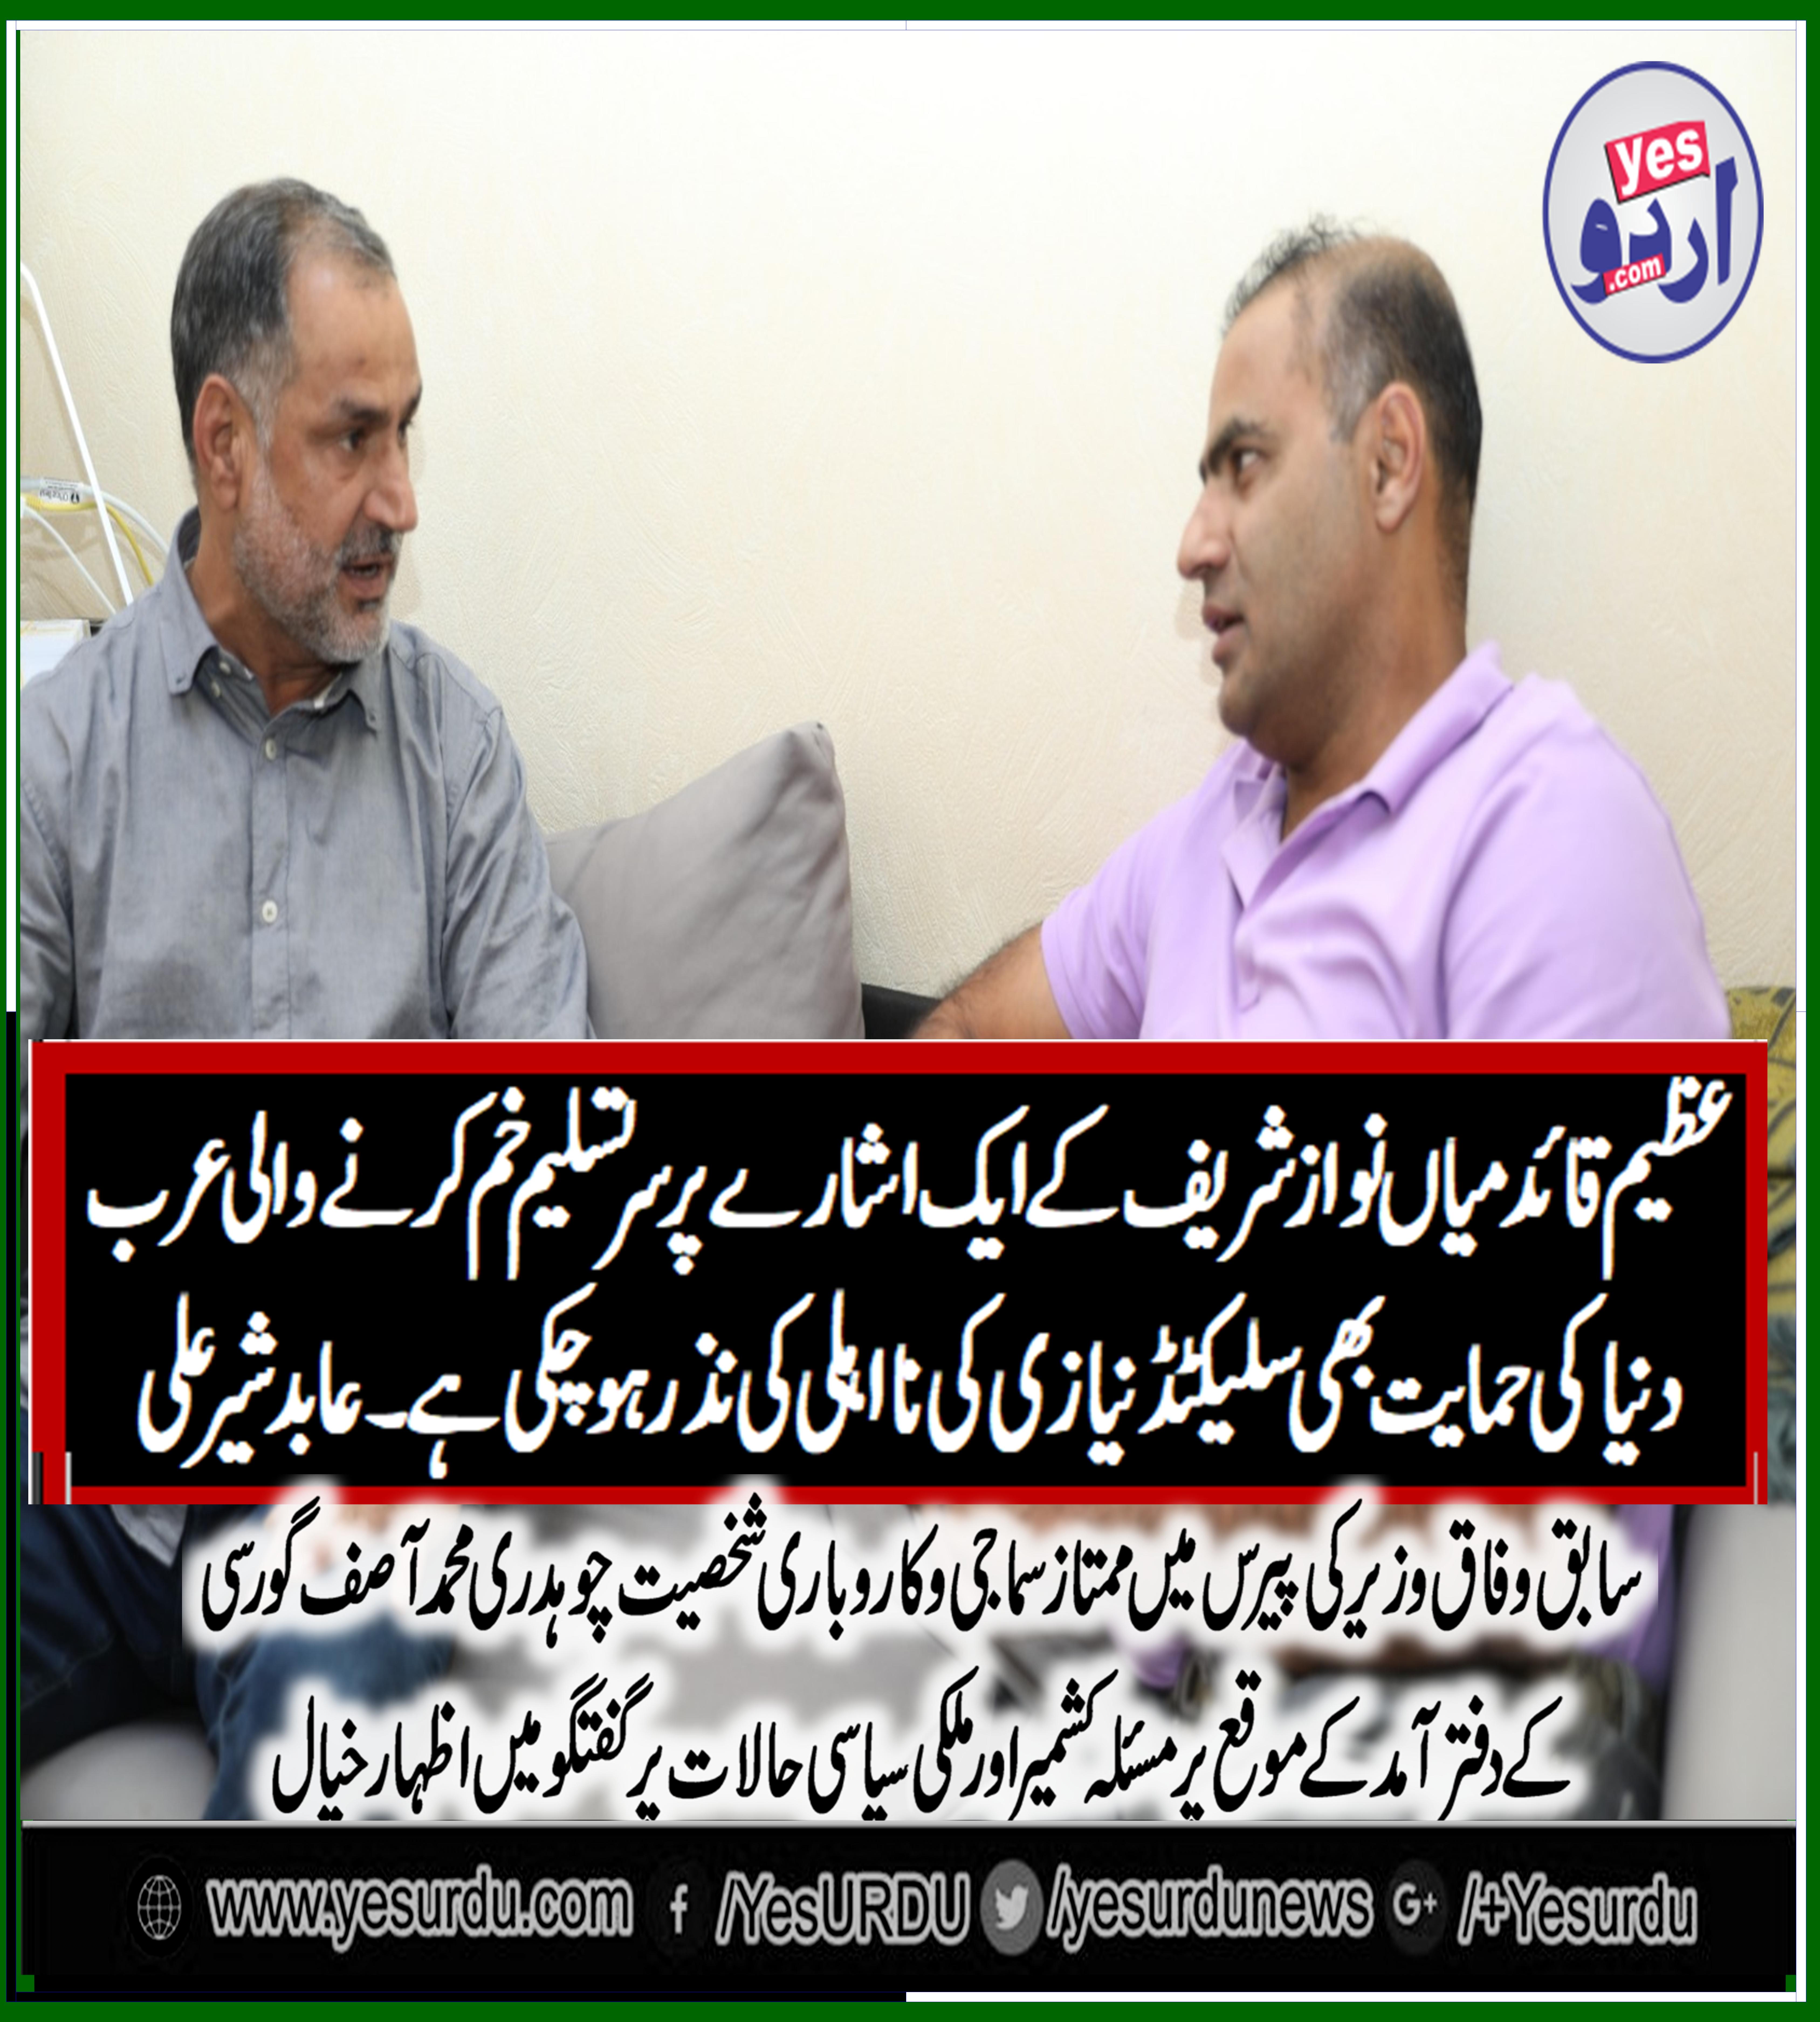 CH ABID SHER ALI, VISITED, FRANCE, IN, A, MEETING, WITH, CH ASIF GORSI, HE SAID, GULF, COUNTRIES, ARE AVOIDING, TO, TALK, SELECTED, JUST, BECAUSE, OF, HIS, BEHAVIOR